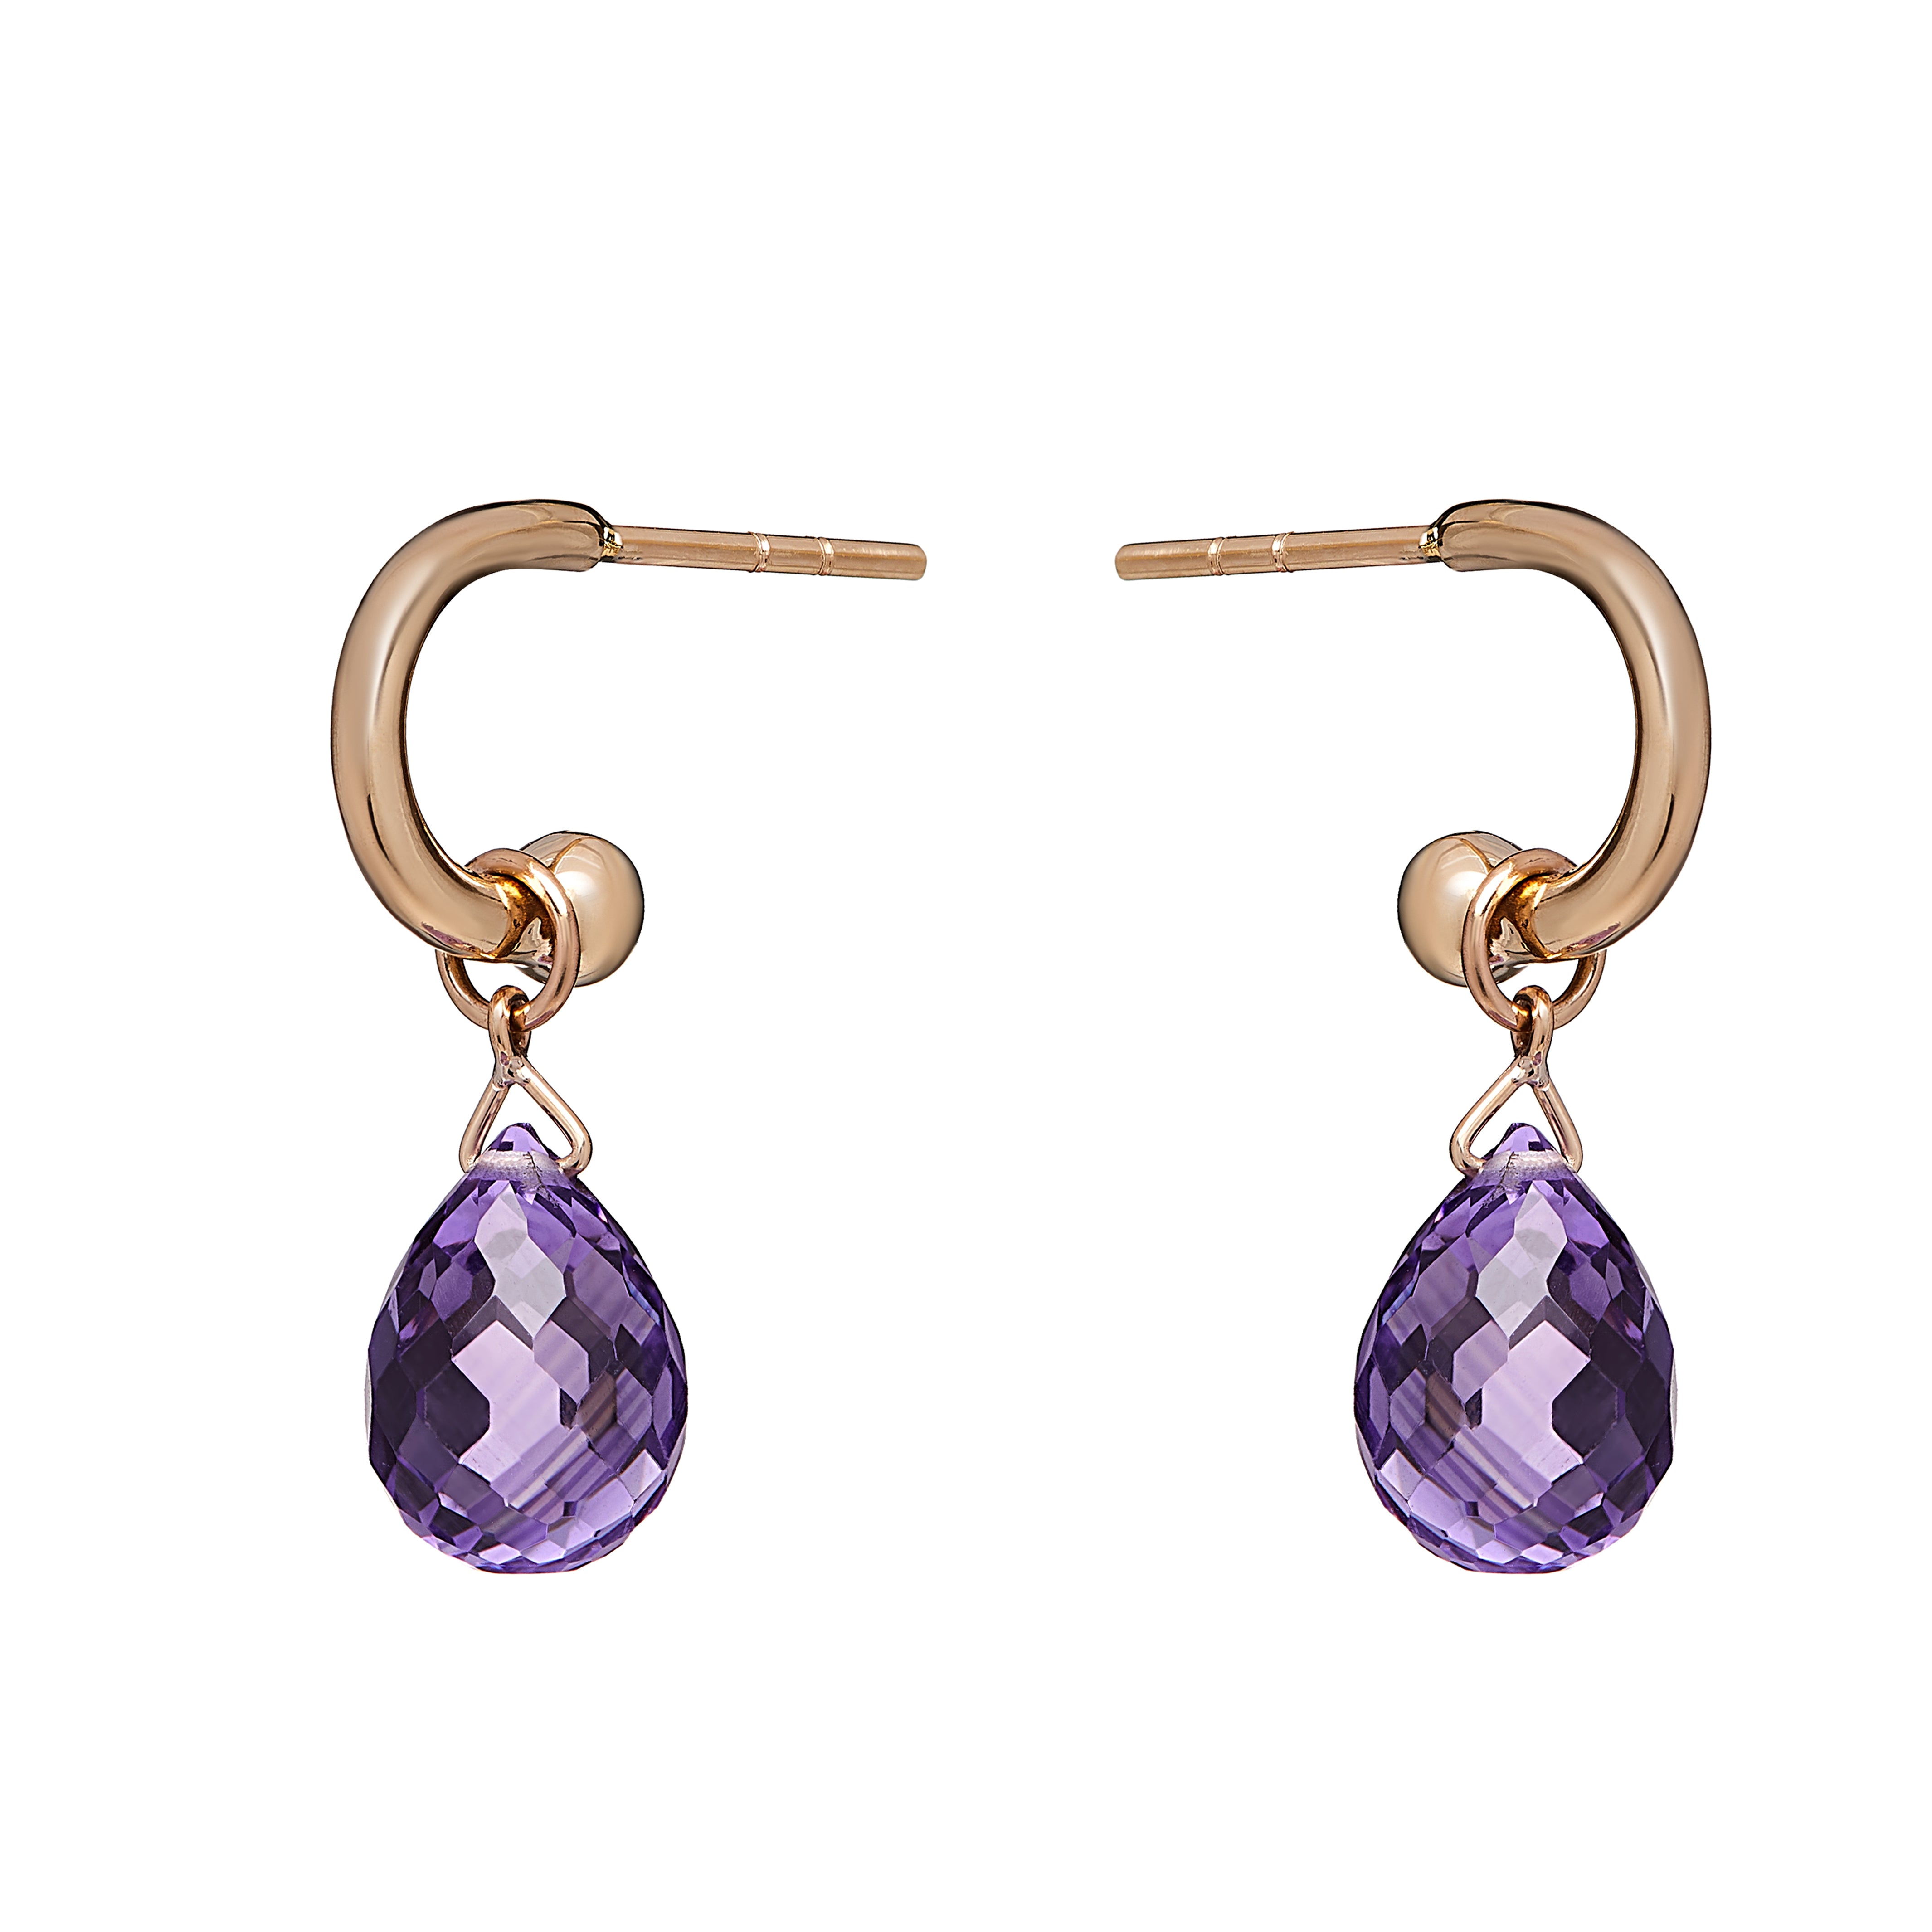 9ct Yellow Gold Hoop Earrings with Detachable Amethyst Briolettes